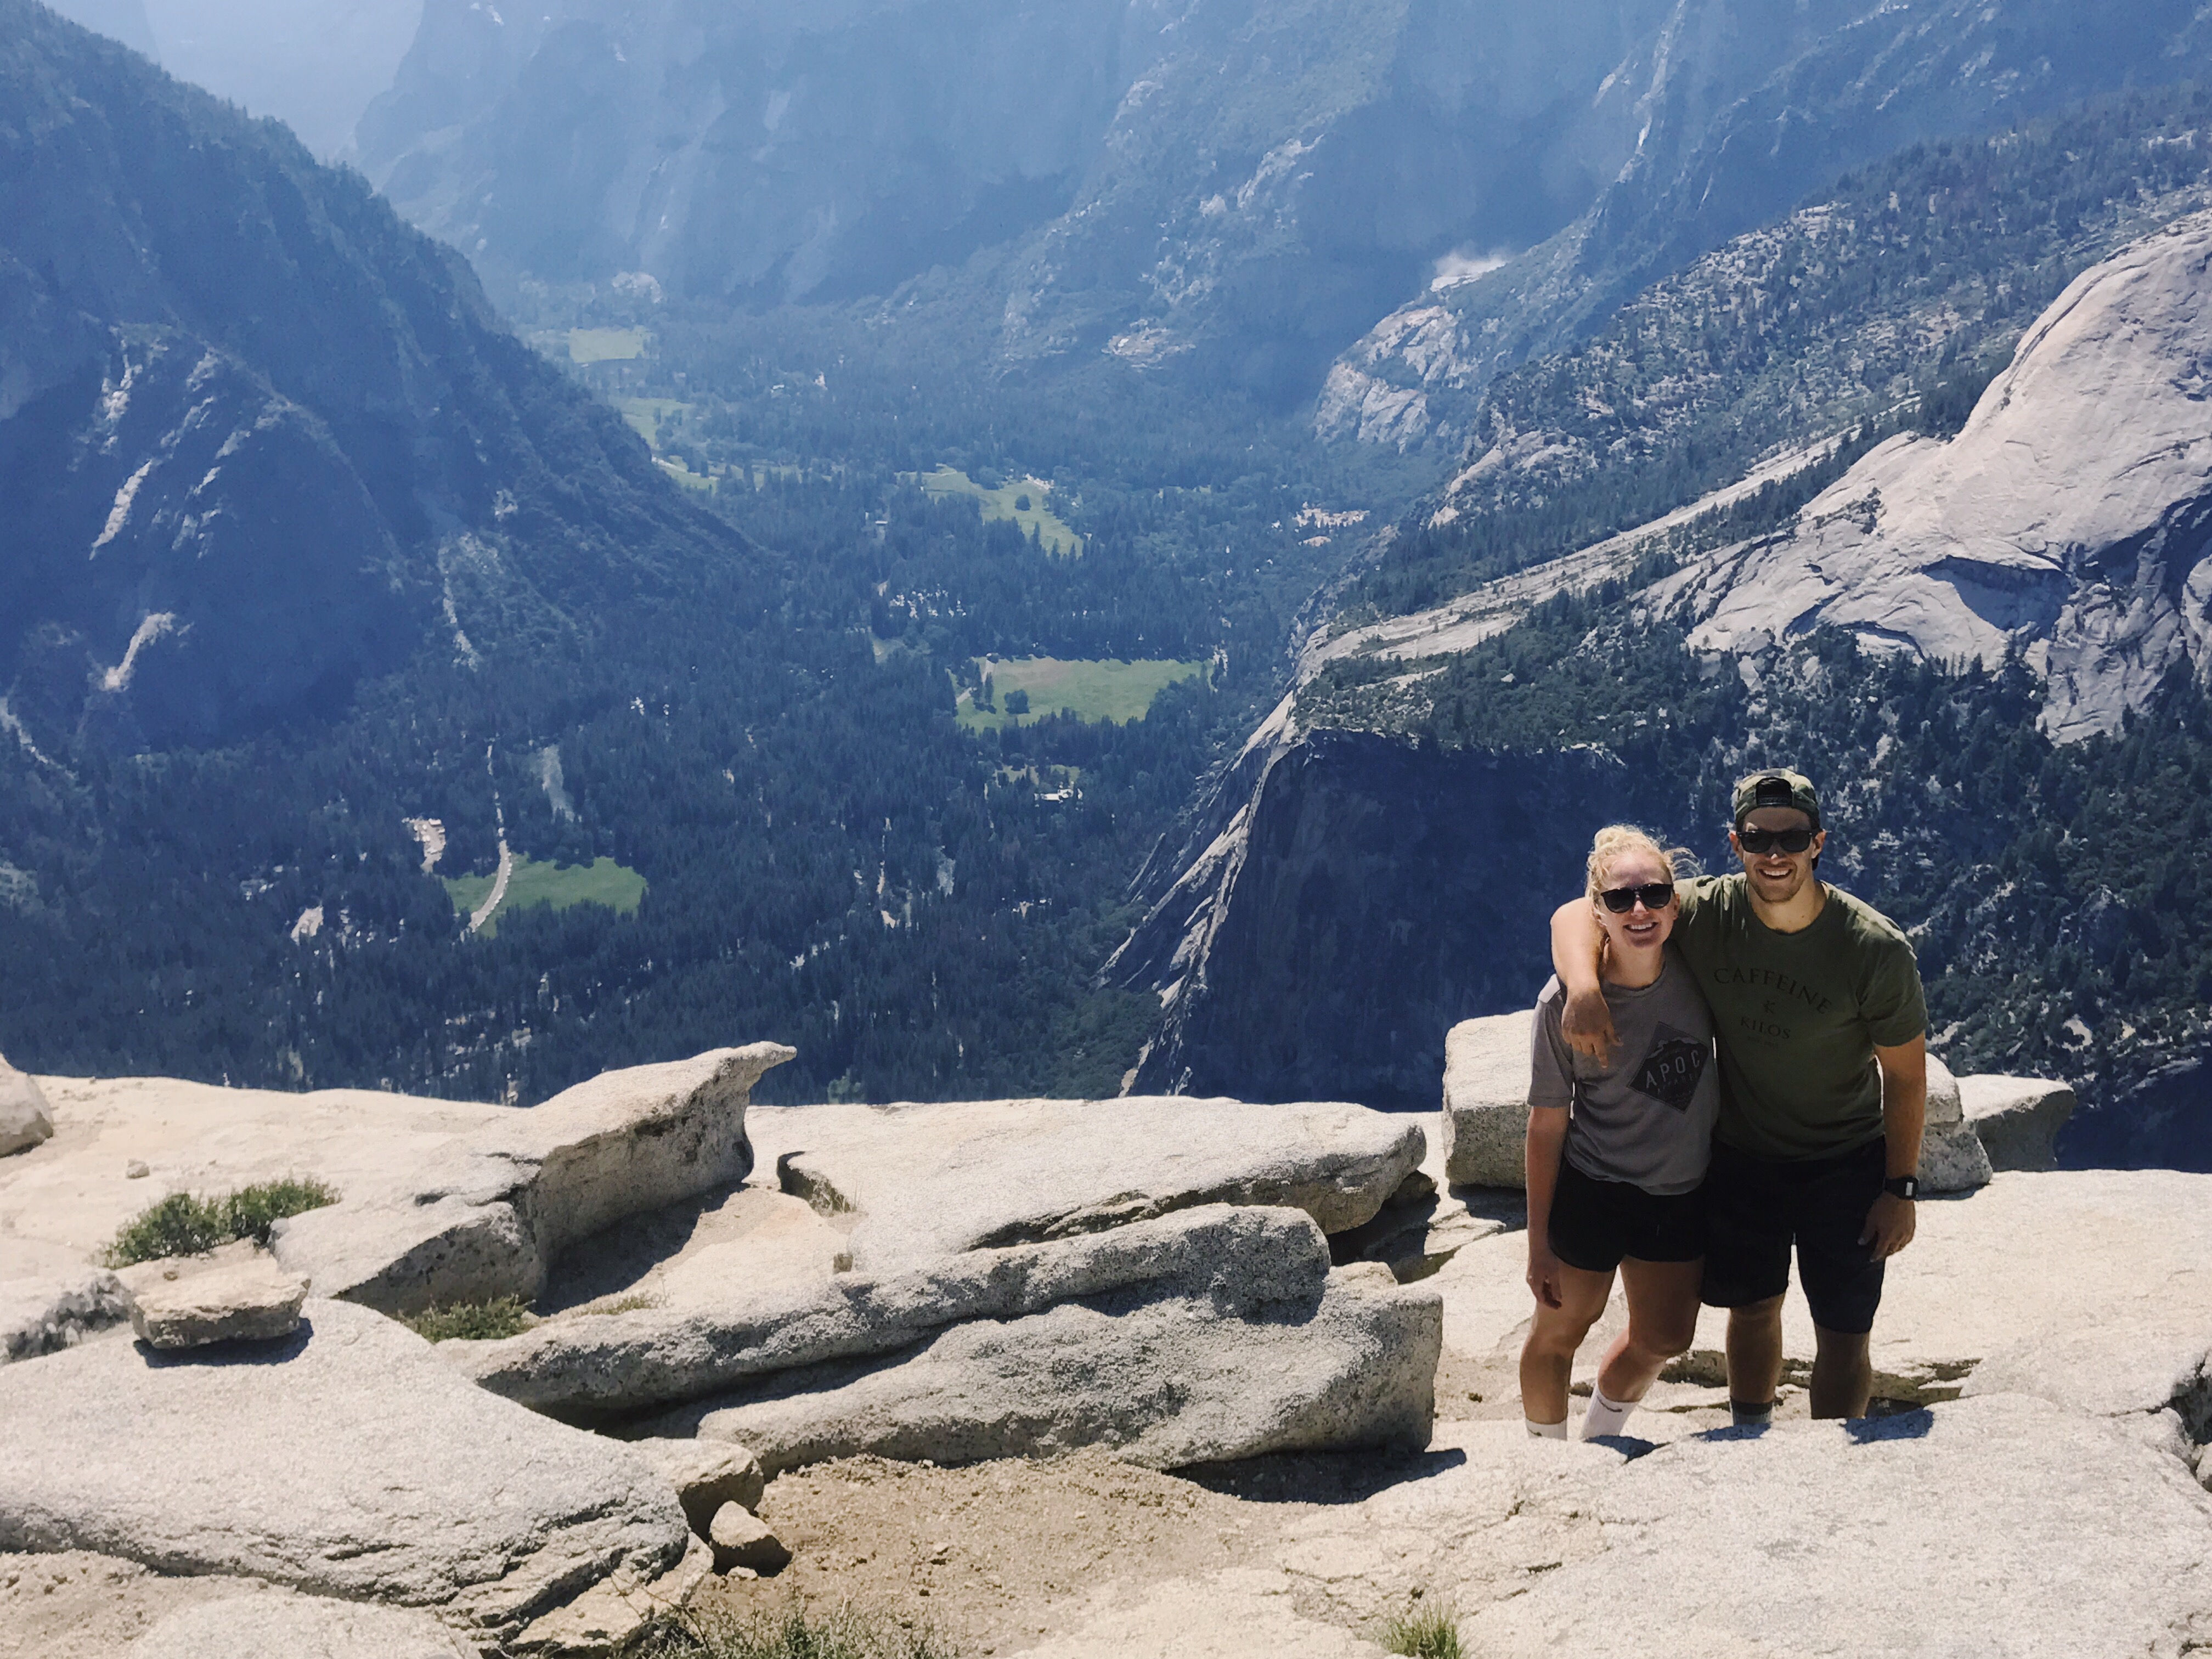 Top of Half Dome